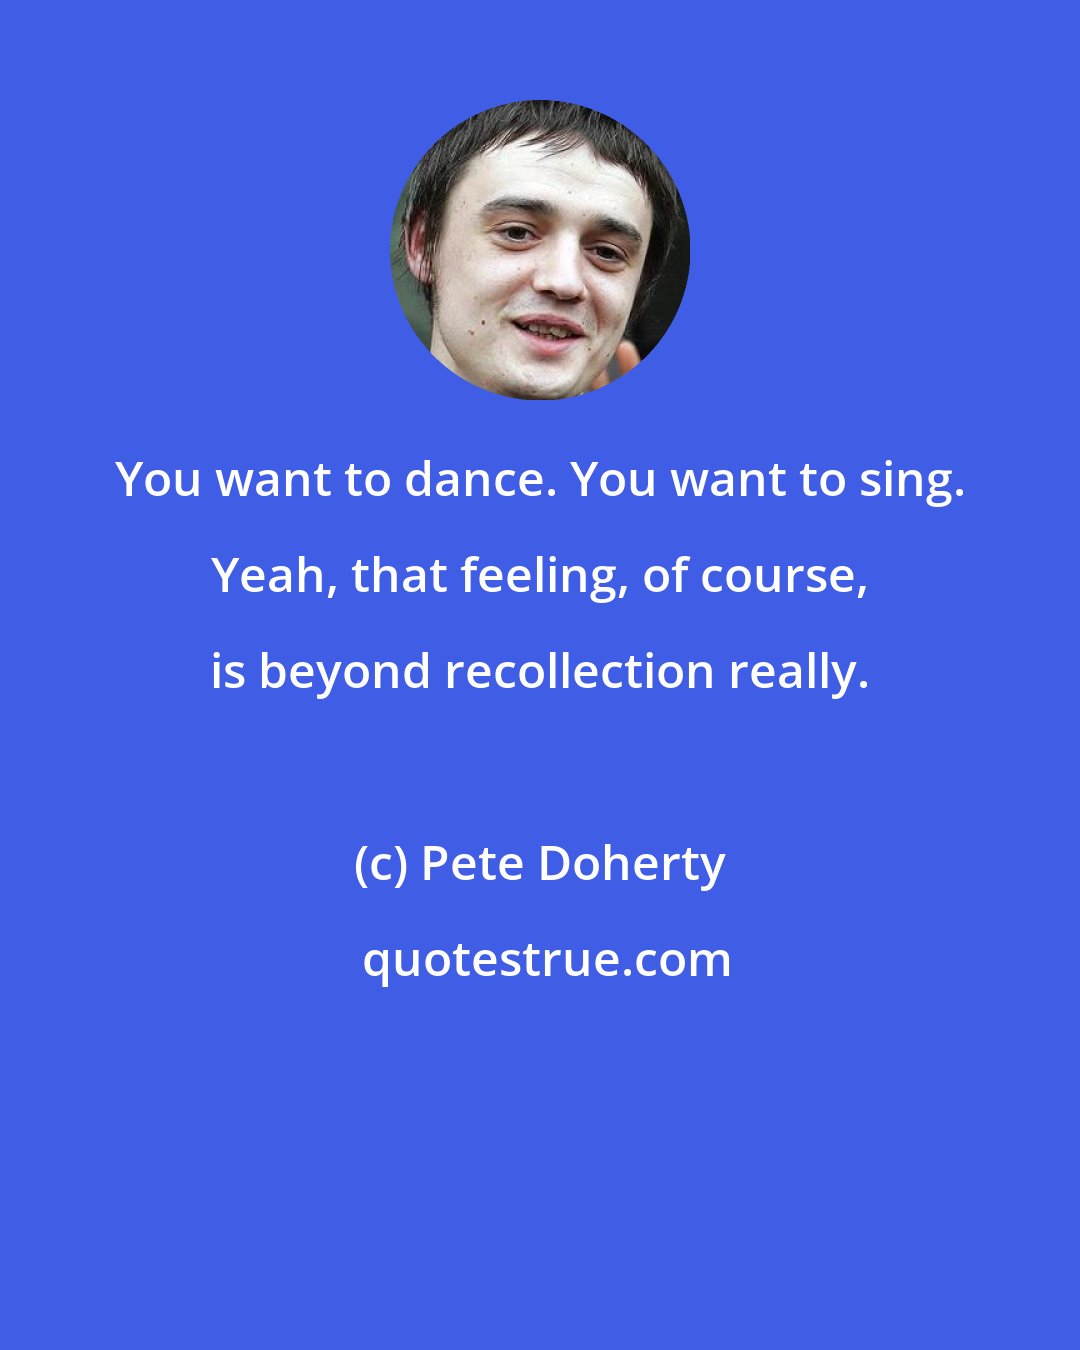 Pete Doherty: You want to dance. You want to sing. Yeah, that feeling, of course, is beyond recollection really.